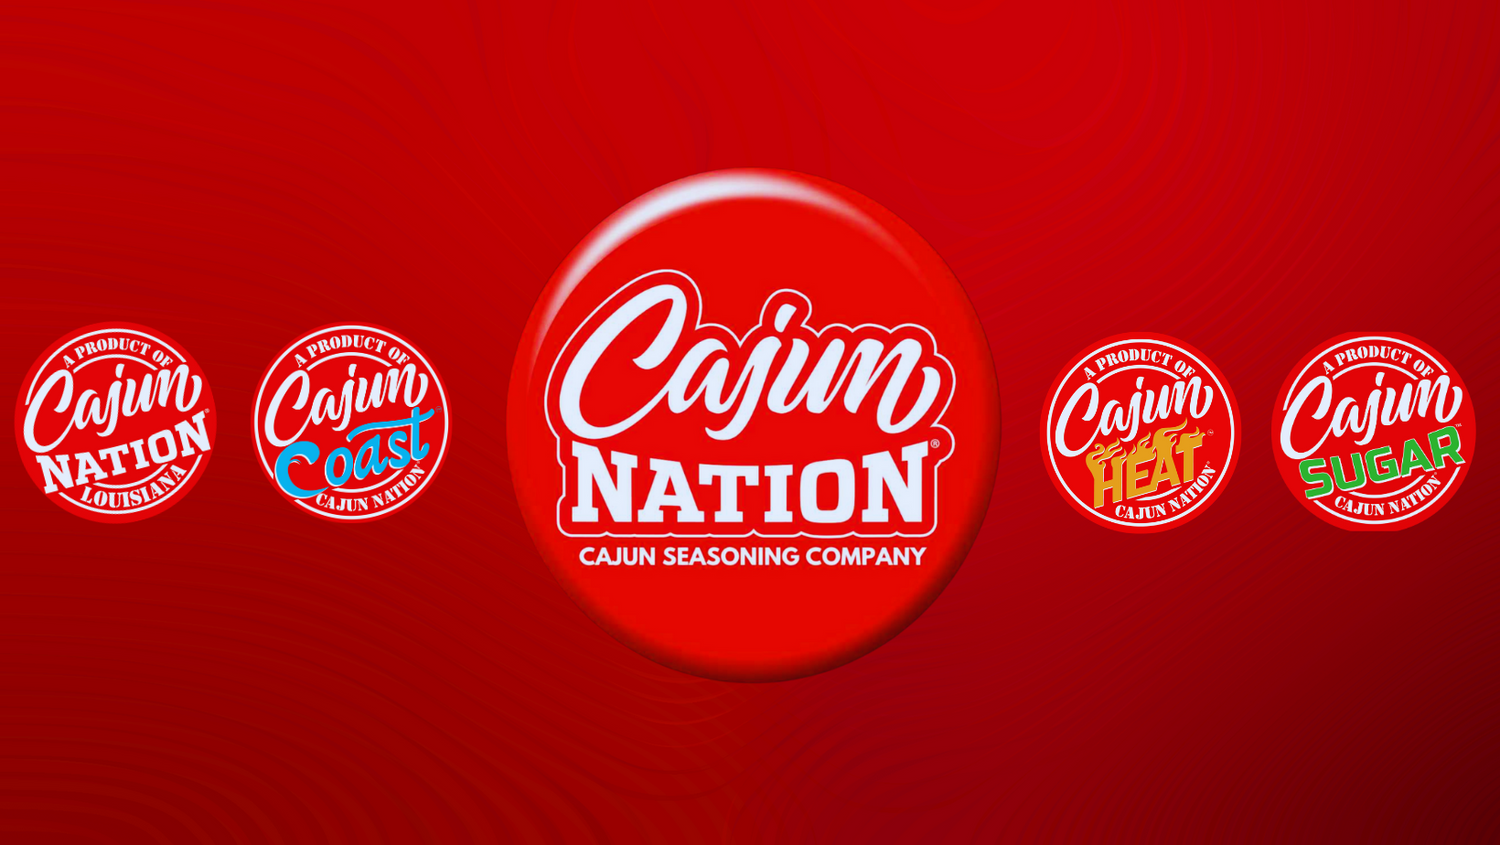 CAJUN NATION co-branding with the commUNITY in the fight against high blood pressure. GEAUX GET THE RED CAN! LOW SODIUM.🧂 NO MSG.🚫 GREAT FLAVOR.😋 CERTIFIED CAJUN.⚜️  #GeauxGetTheRedCan #CajunNationSeasoning #CajunNation #Cajun Heat #CajunCoast #CajunSugar #HomeChef #CajunCooking #CajunRecipes #Cajun #Cajuns #CajunSpices #CajunSeasoning, #Seasoning #Spices #Seafood Boil #HotSauce #ChowChow #GarlicPepper #Garlic #Pepper #Cajun Food #LowSodium #NoMSG #commUNITY